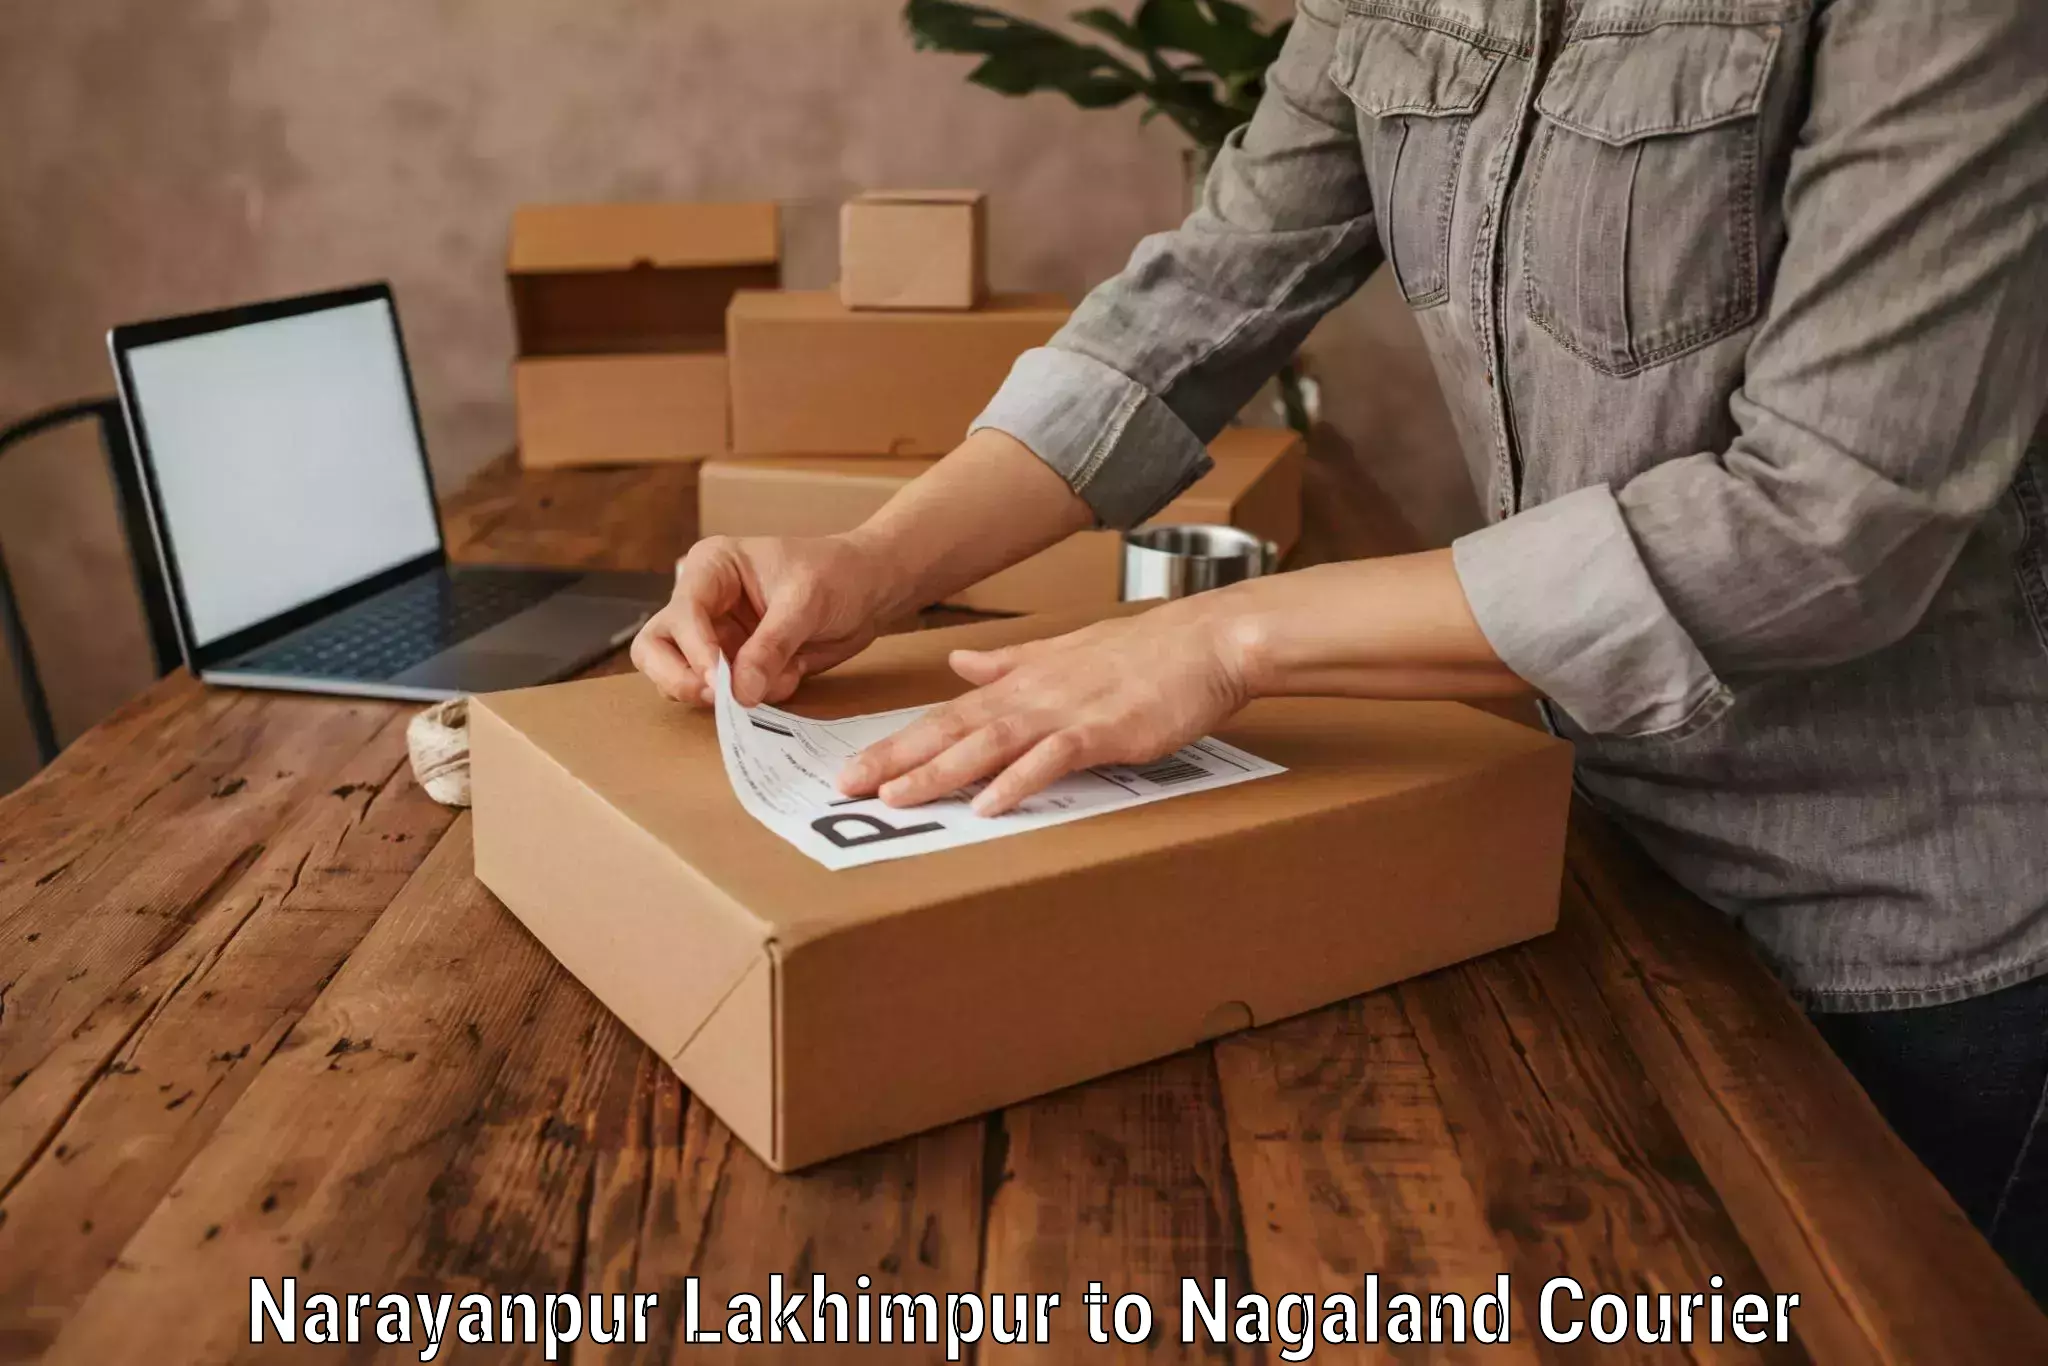 Luggage shipment specialists Narayanpur Lakhimpur to Kiphire